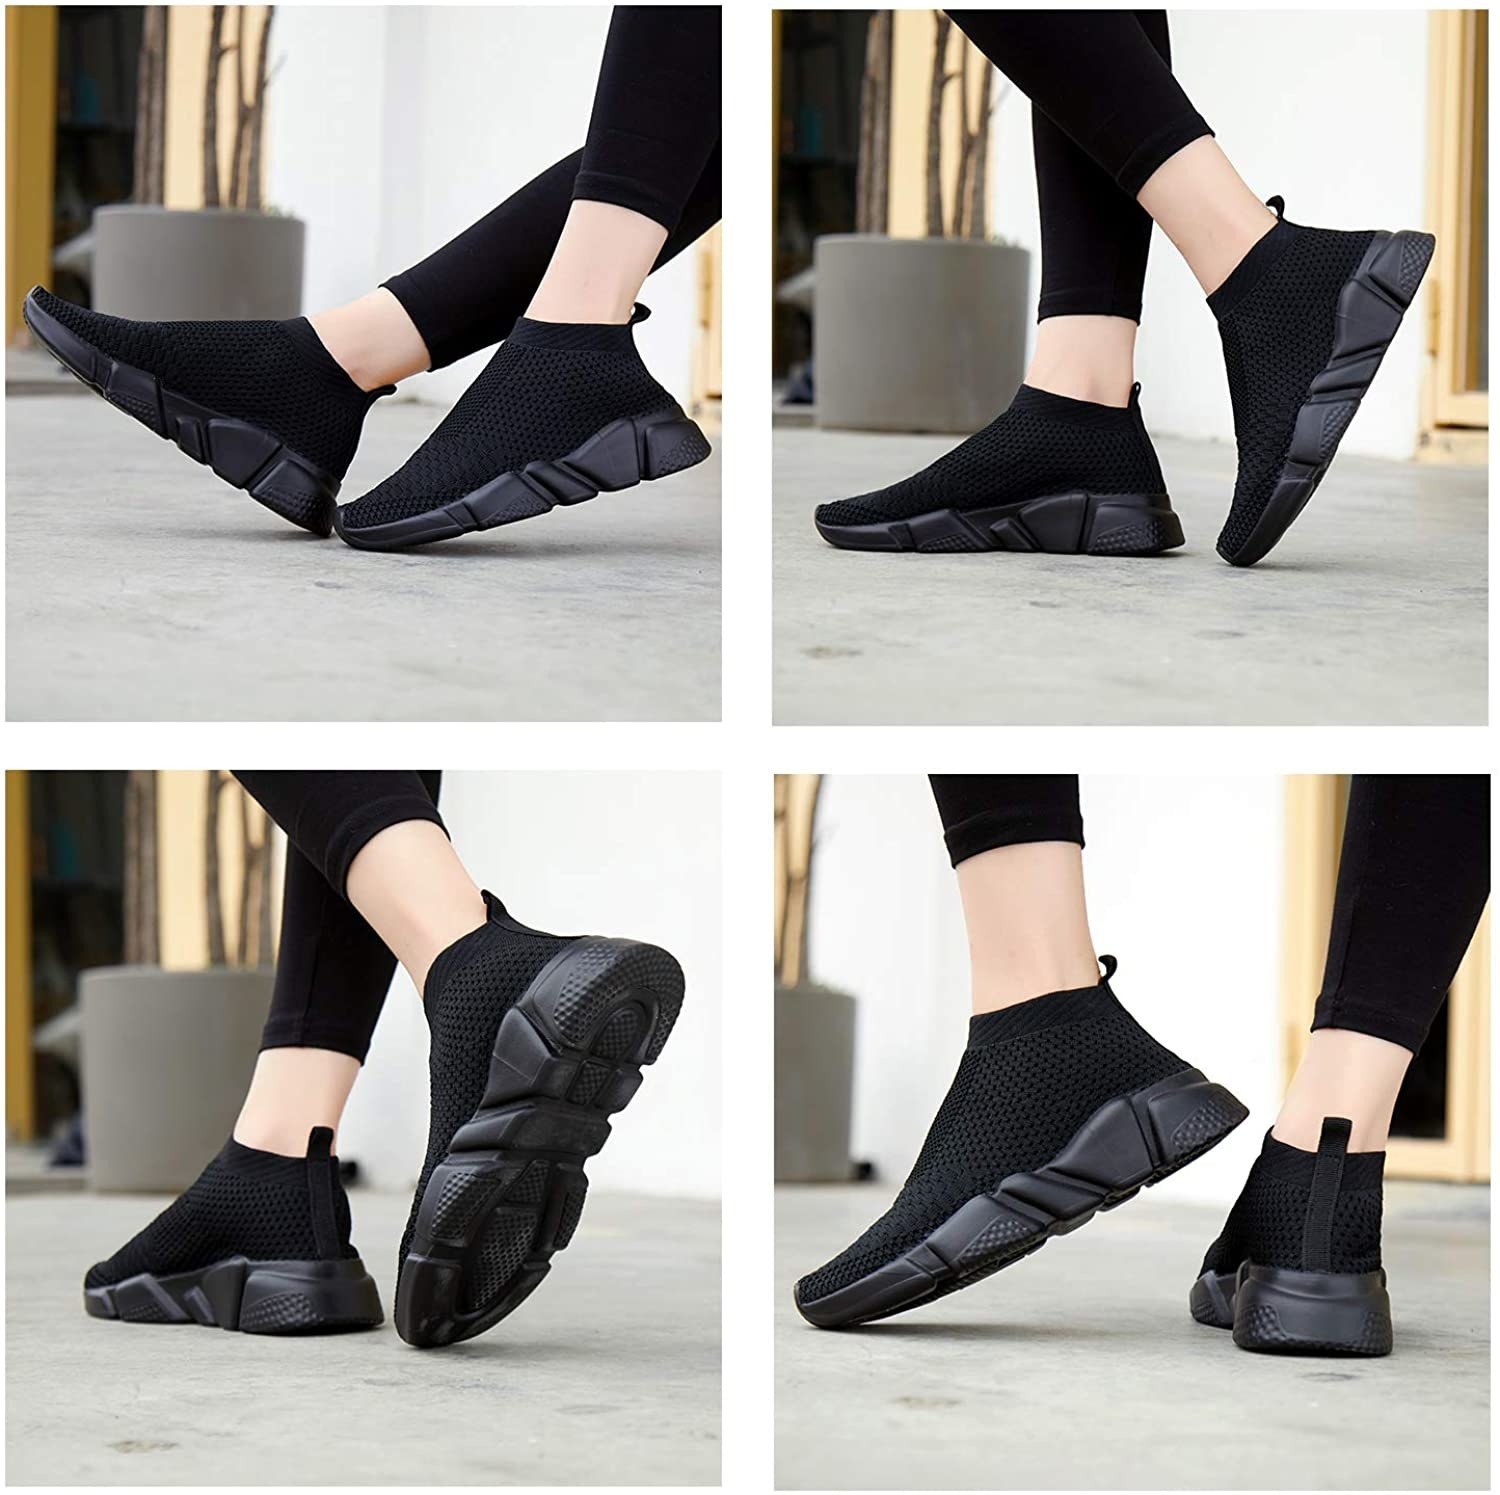 Ankle Boots Knit Sock Shoes Spring & Autumn Ladies Flats Women Stretch Footwear 